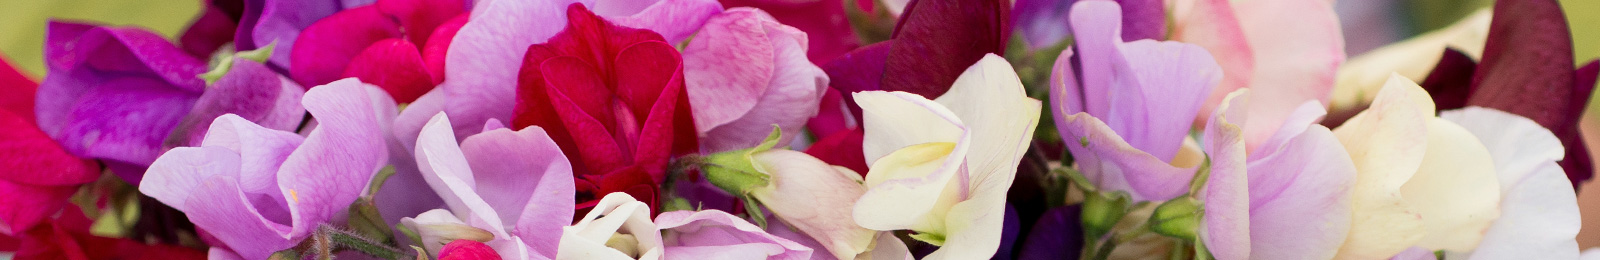 Sweet Pea: Sow and Grow Guide